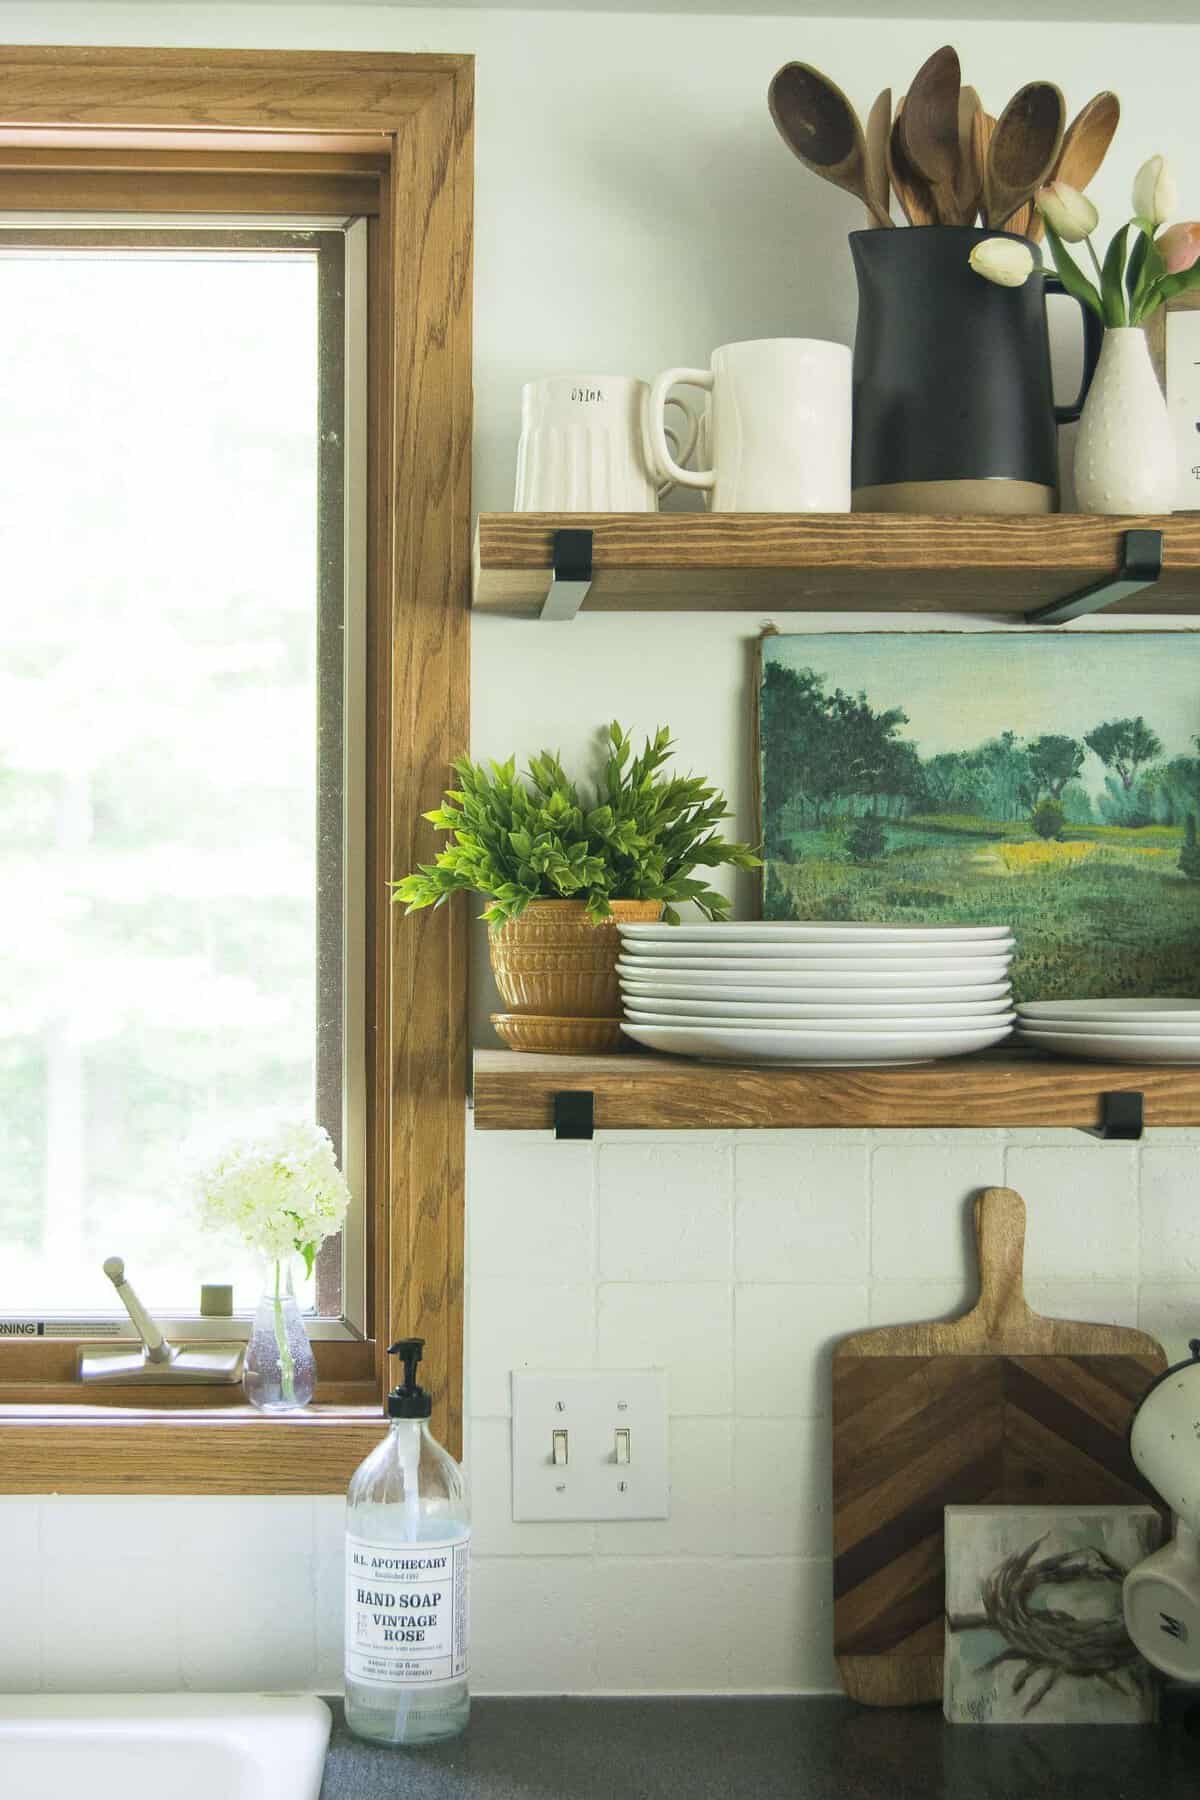 Diy Open Shelving Tutorial With Free, How To Make Open Shelving For Kitchen